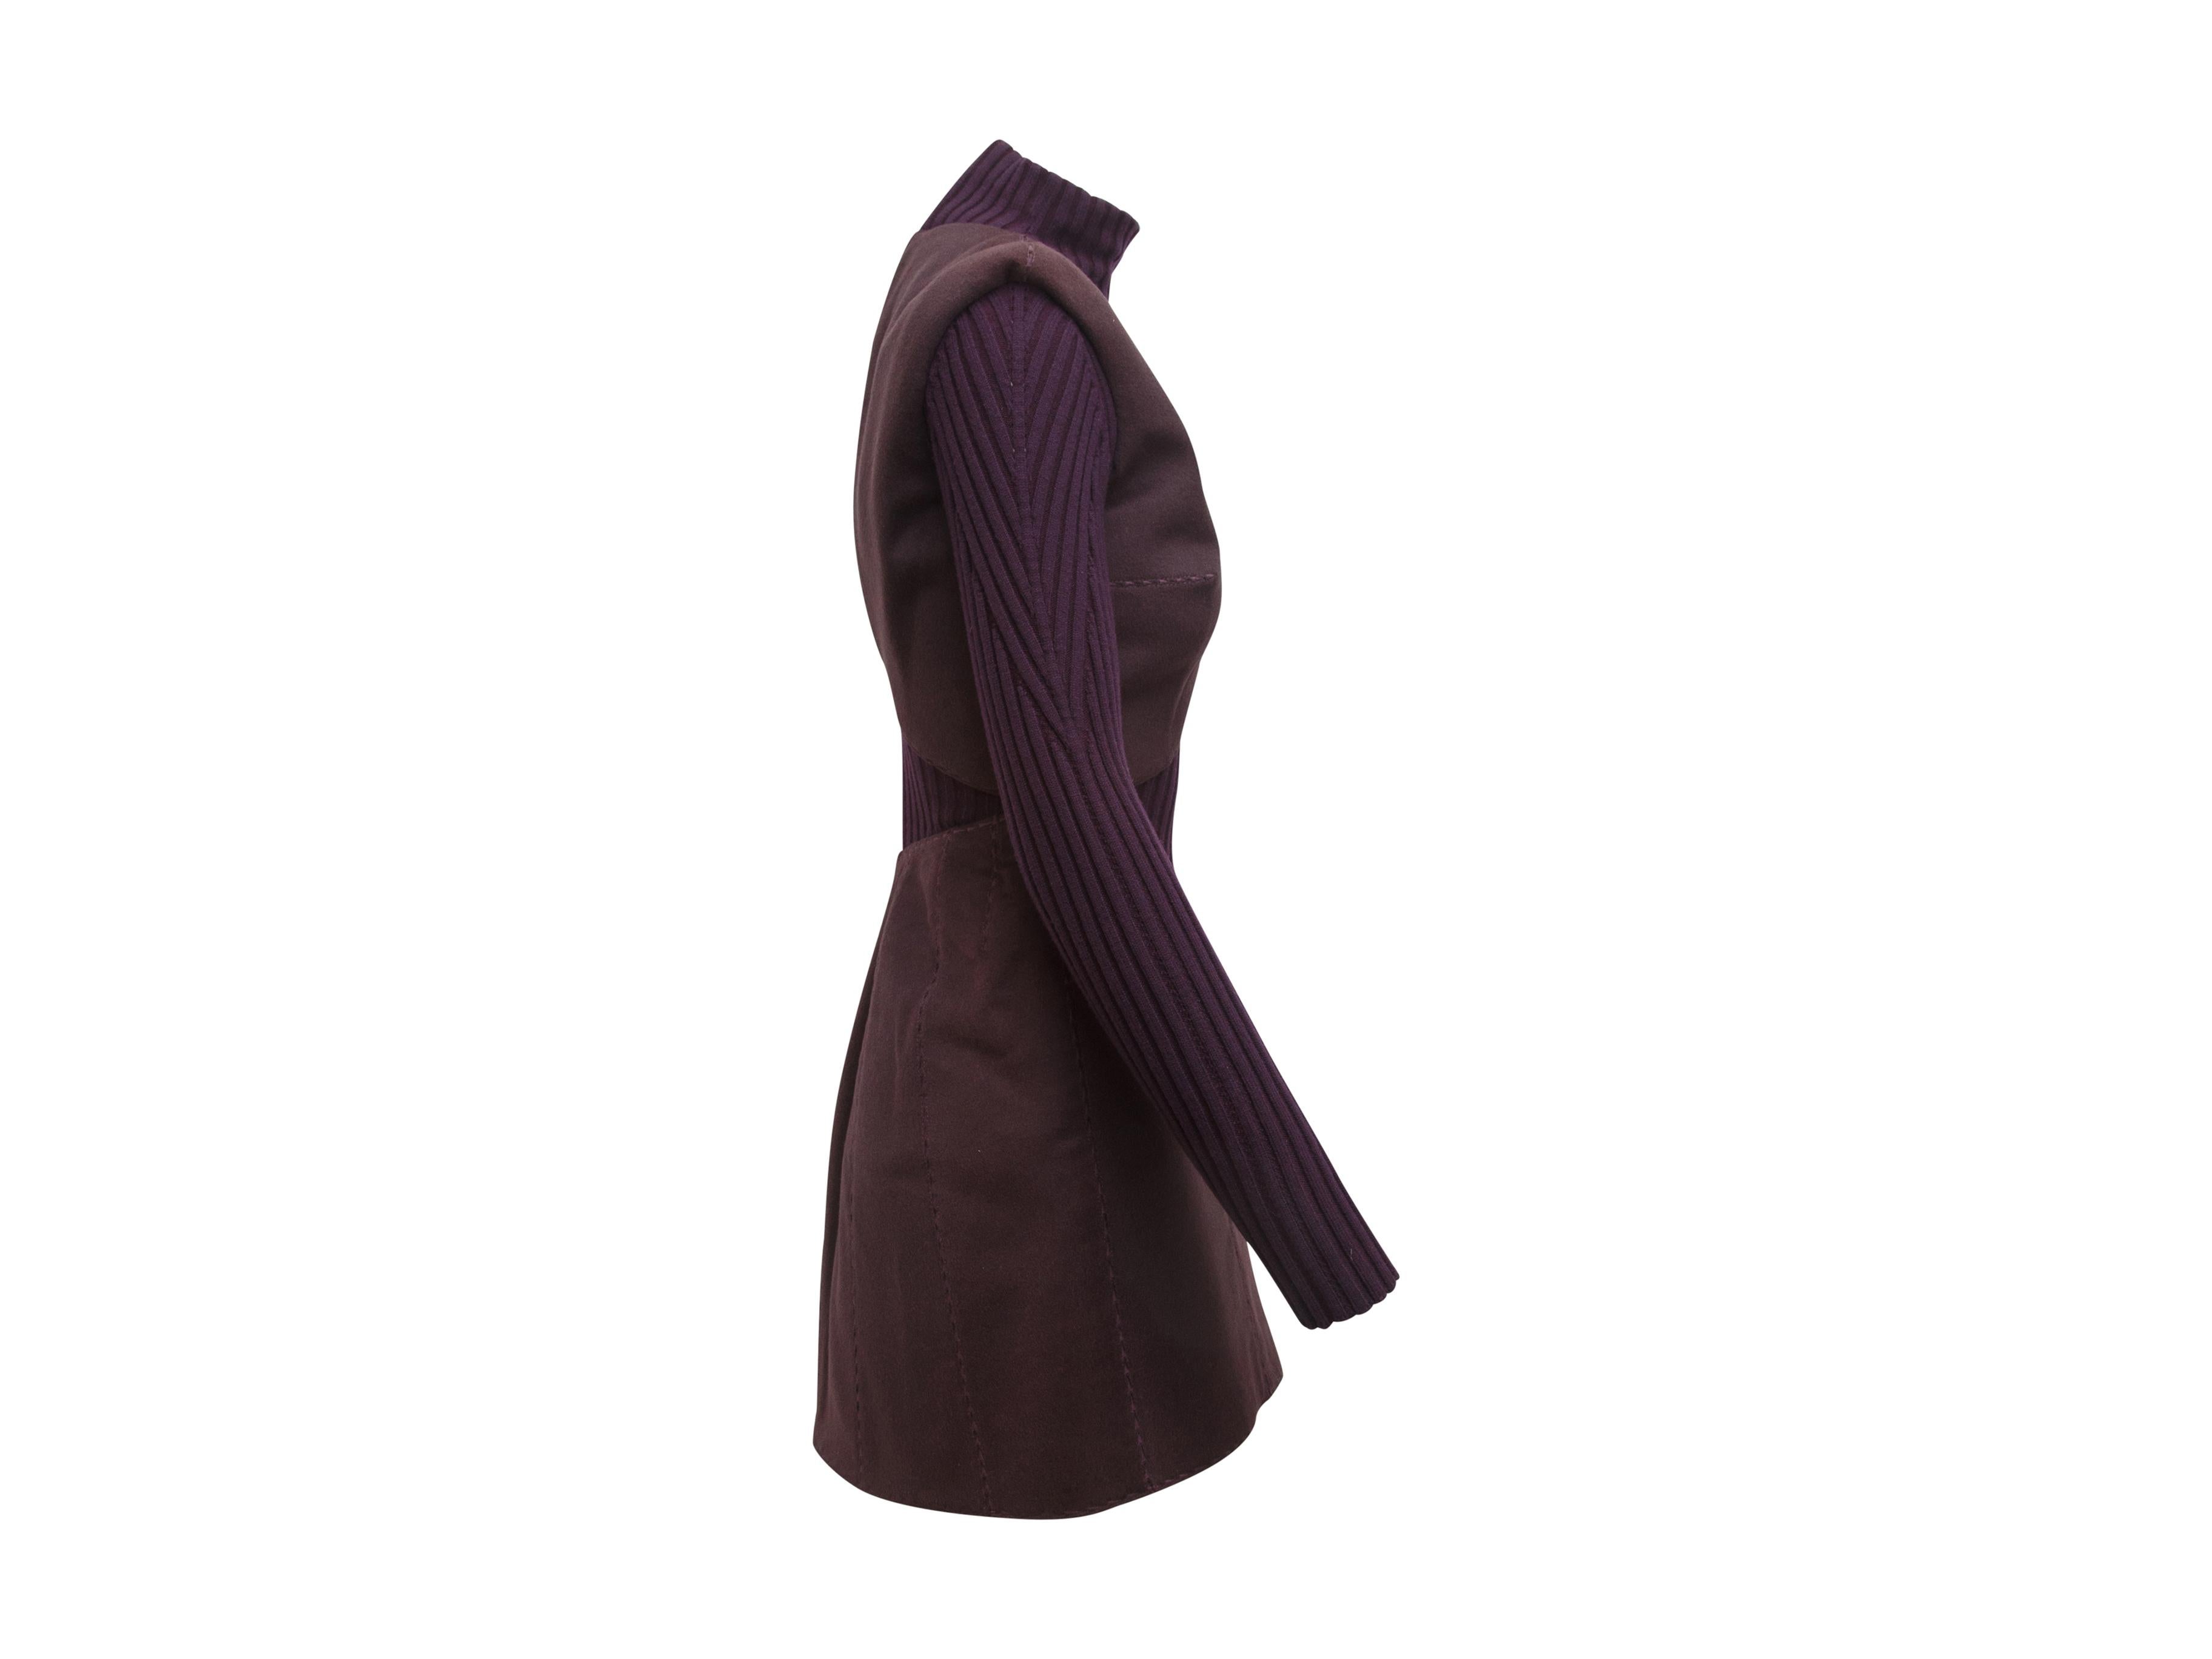 Product details:  Purple ribbed knit and suede dress by Alexander McQueen.  From the fall 2007 collection.  Layered illusion.  Stand collar.  Long sleeves.  Back zip closure.  28